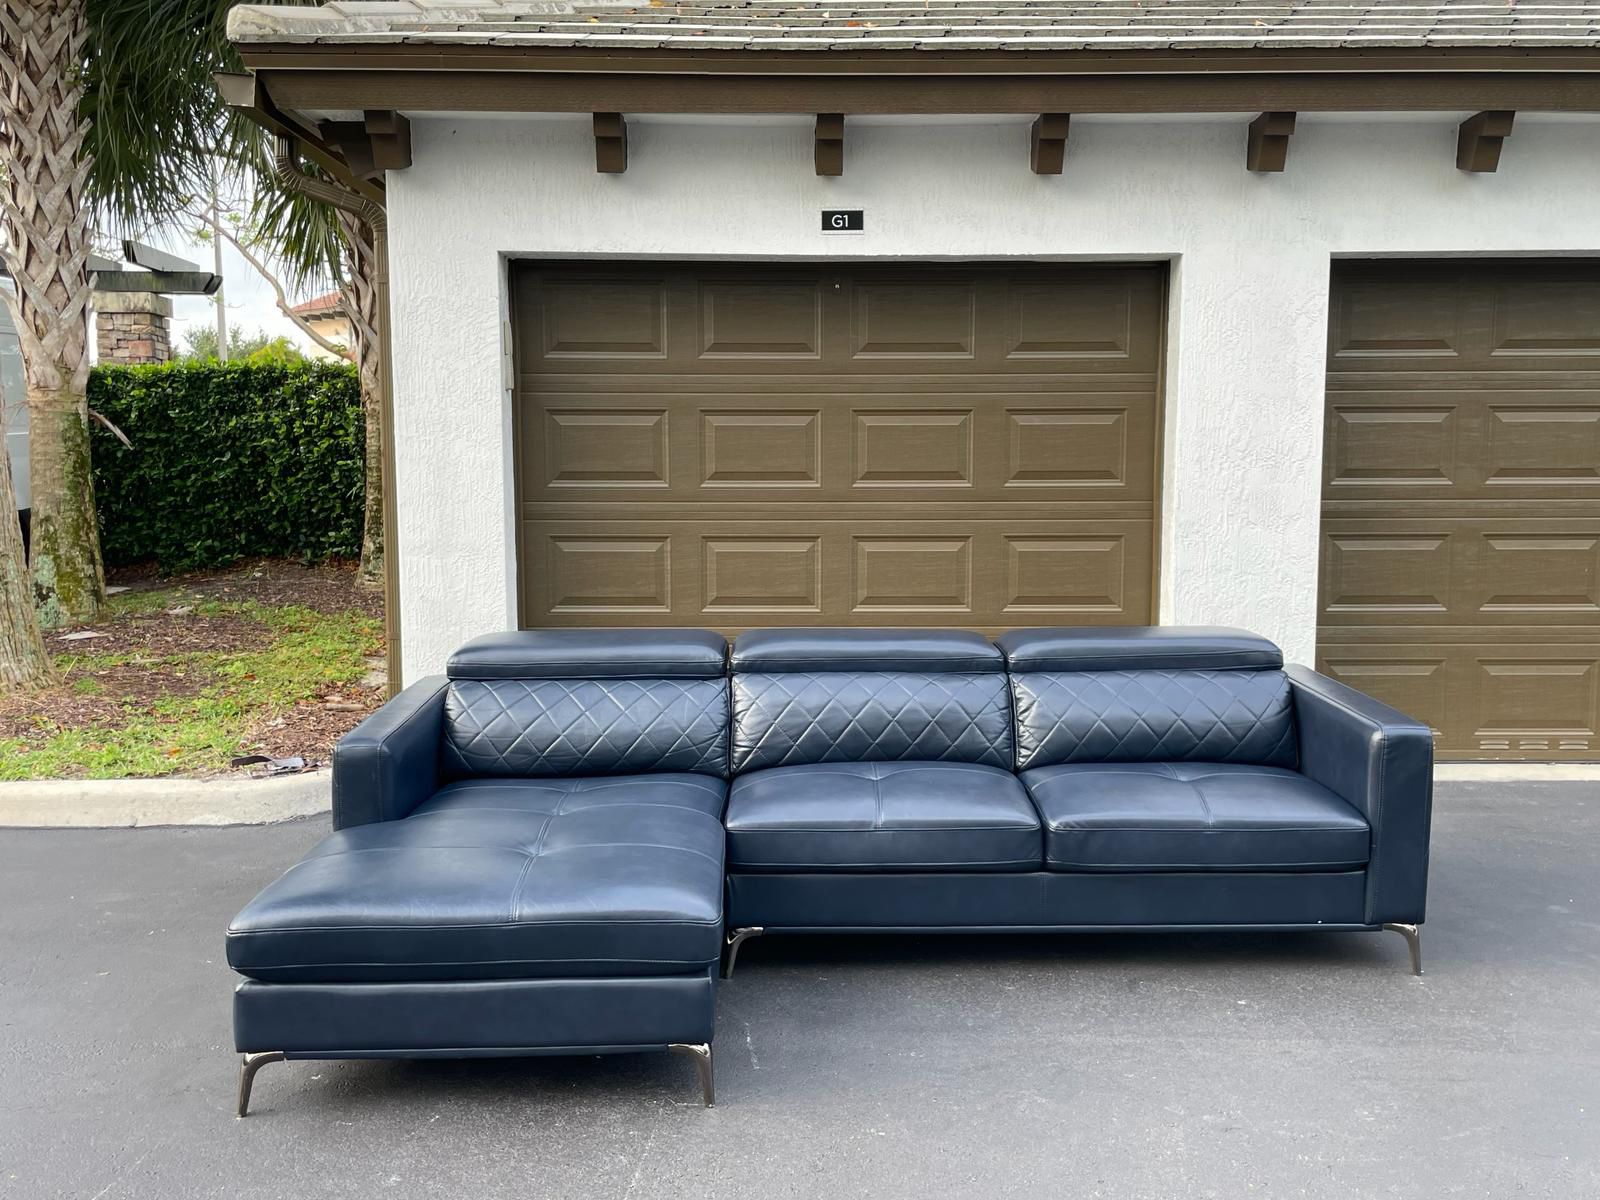 Sectional Couch/Sofa - Navy Blue - Sofia Vergara - Delivery Available 🚛